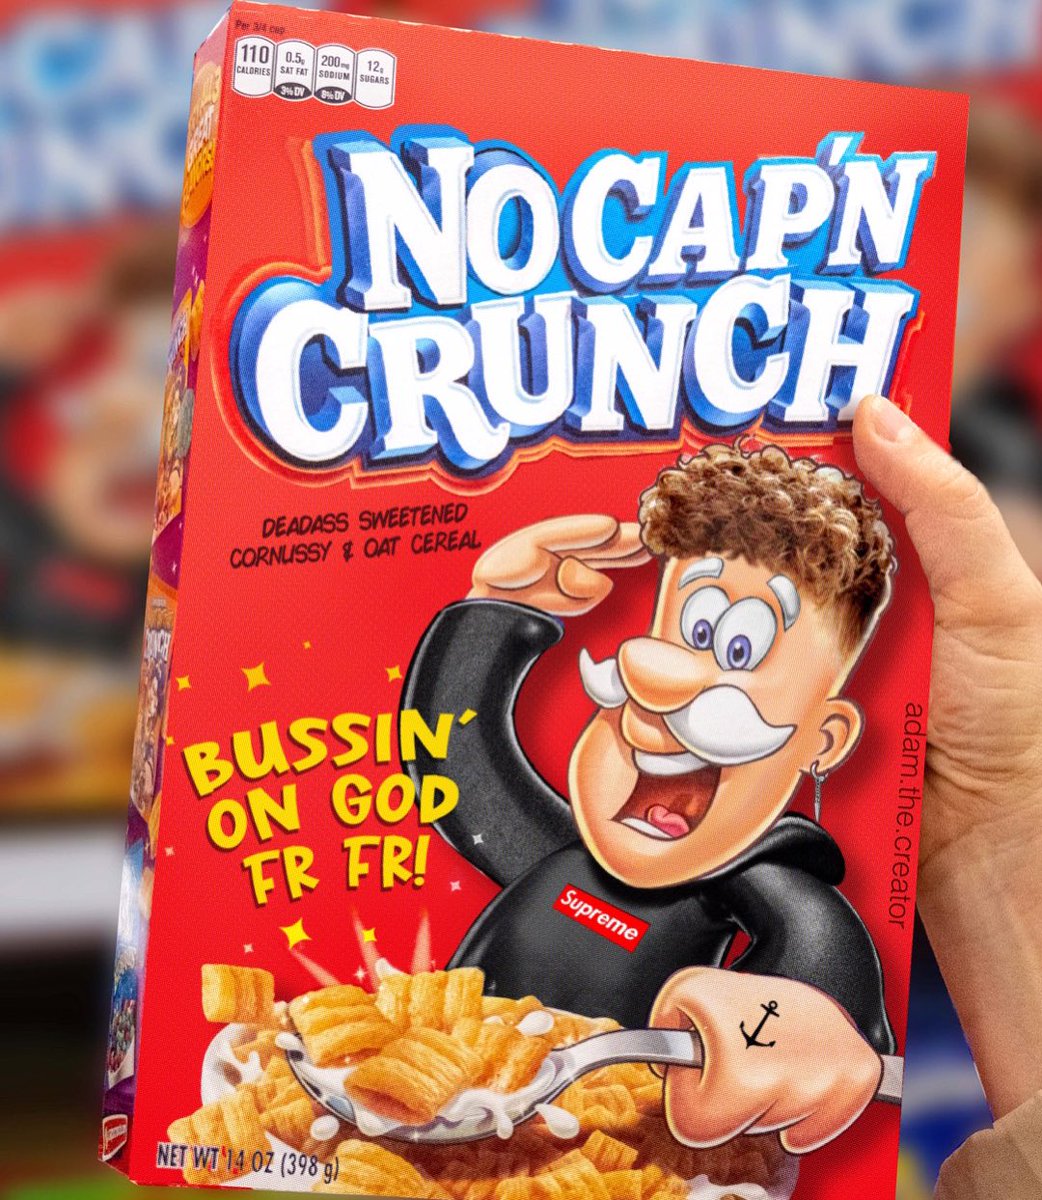 New cereal just dropped 🔥